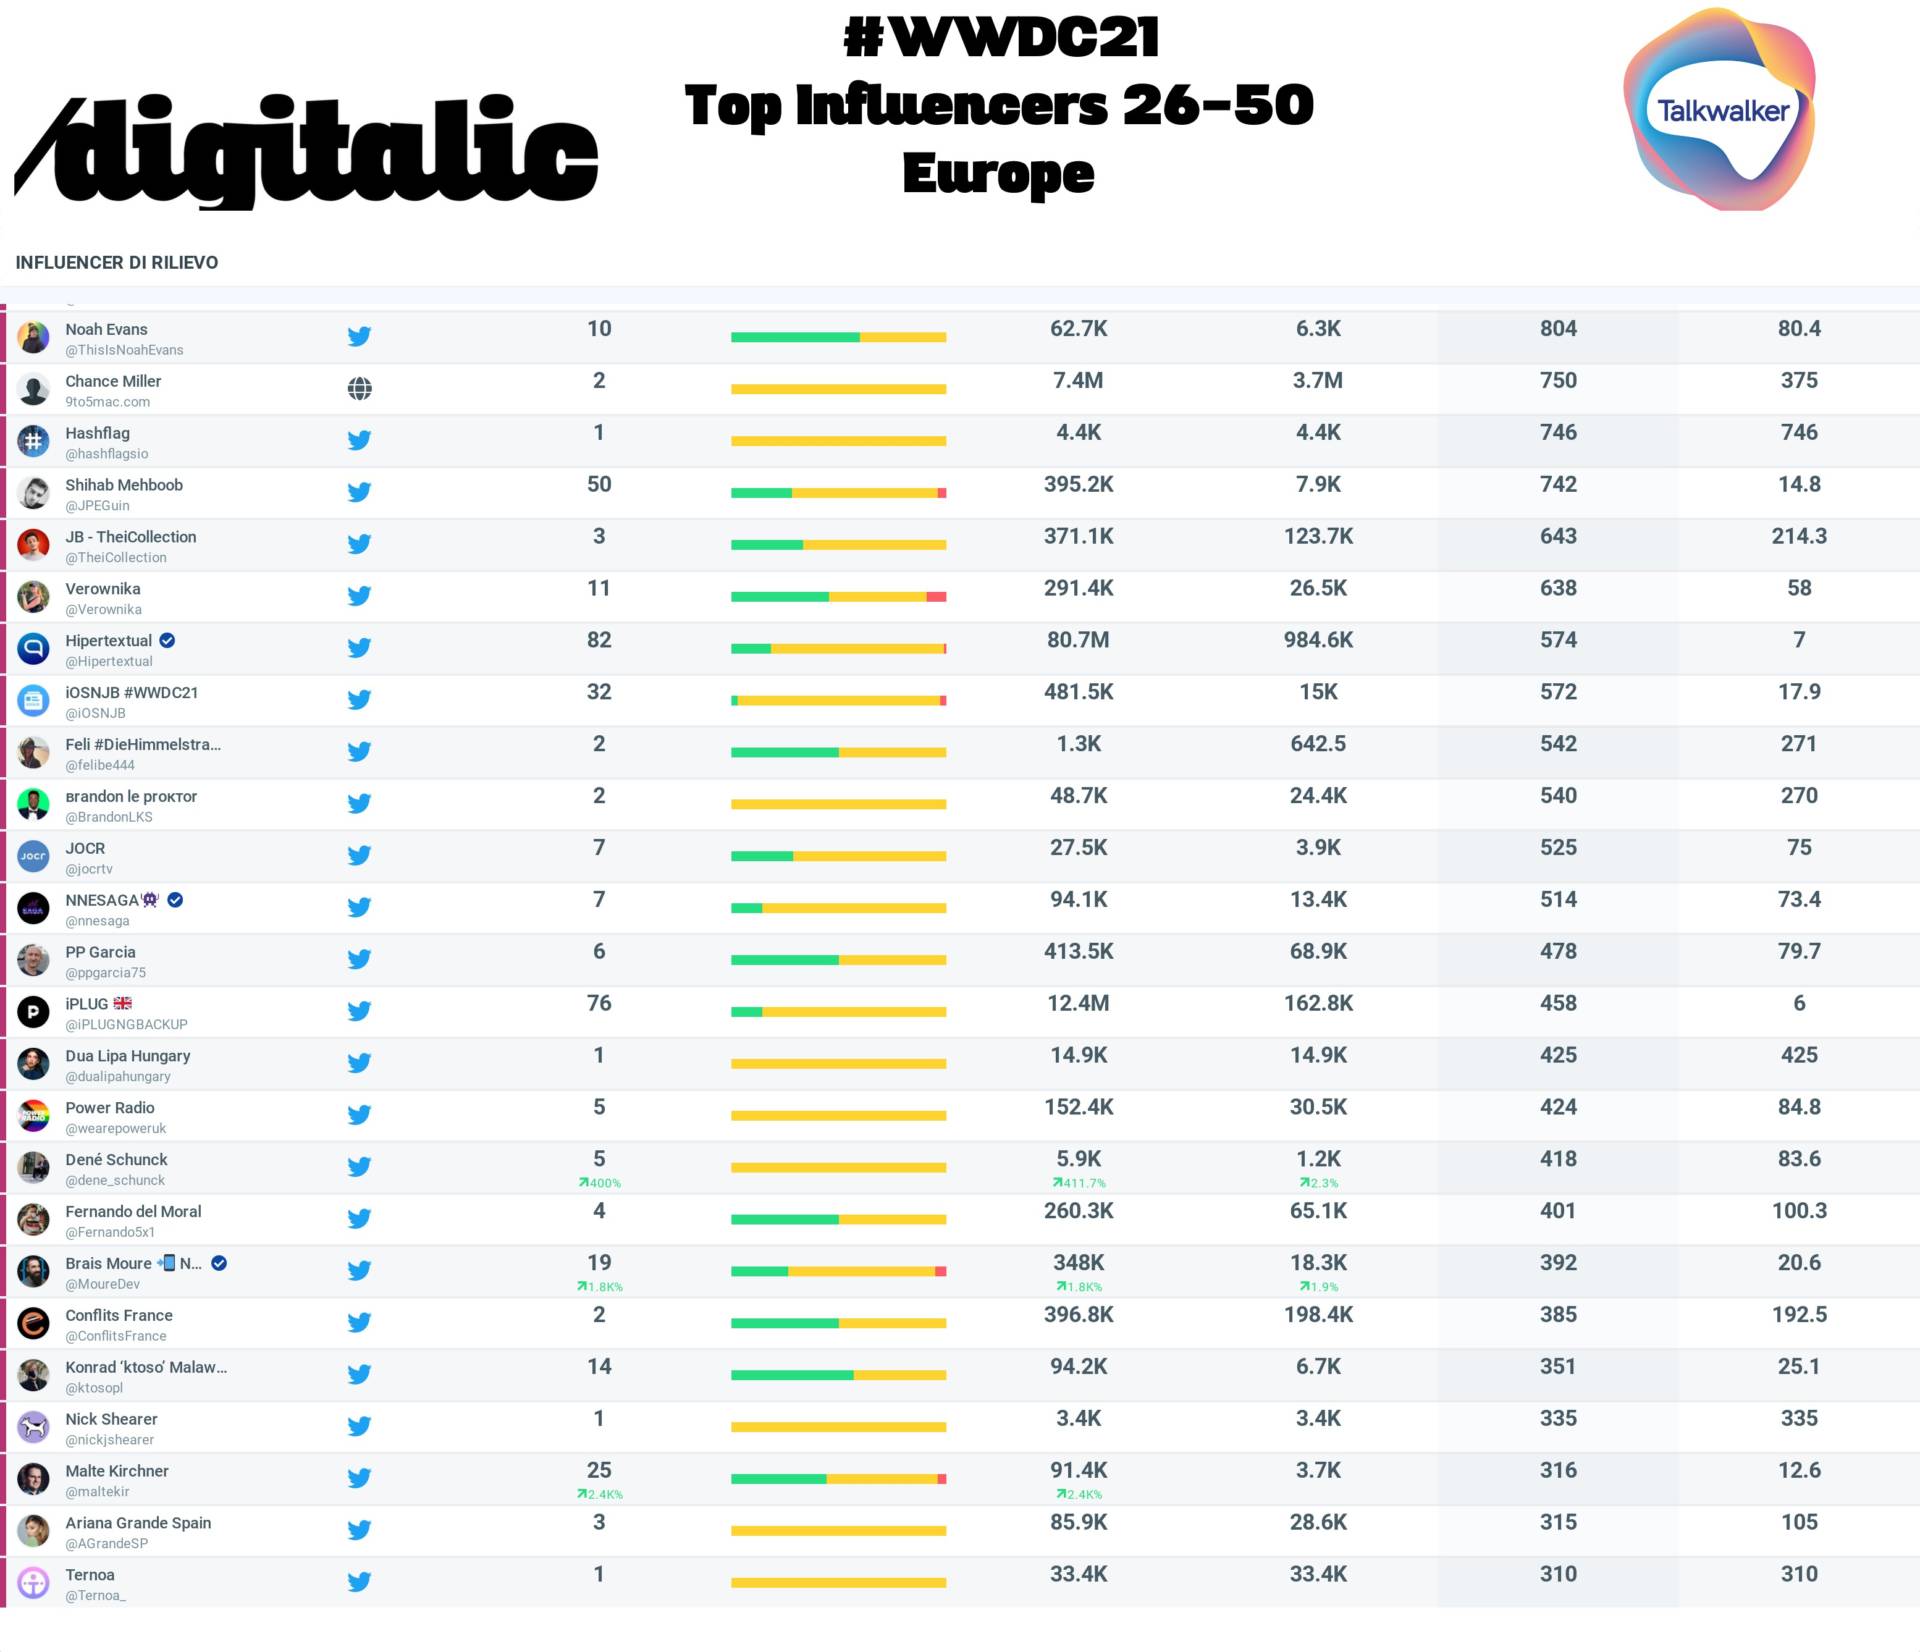 WWDC top influencers EUROPE 26-50